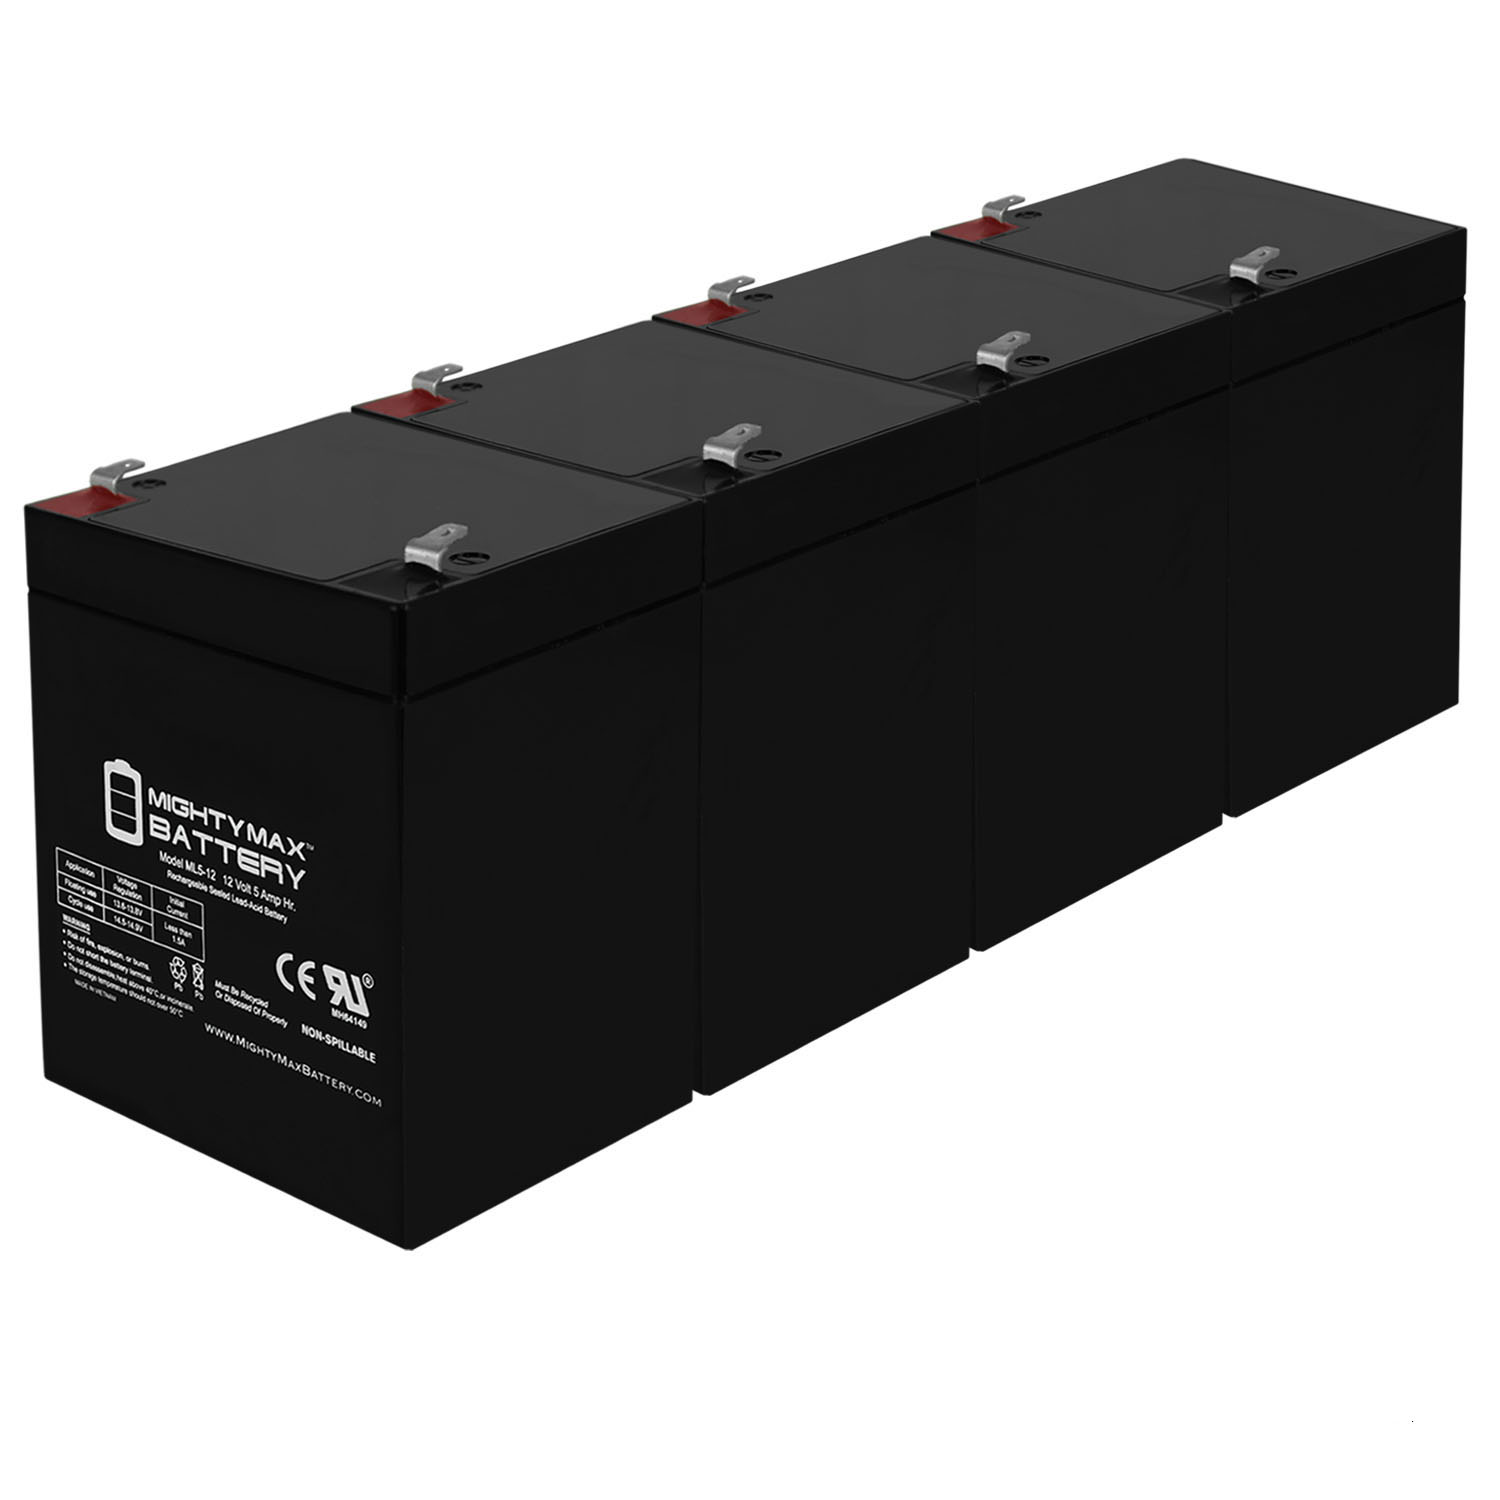 12V 5AH SLA Replacement Battery for GS Portalac PX12050 - 4 Pack